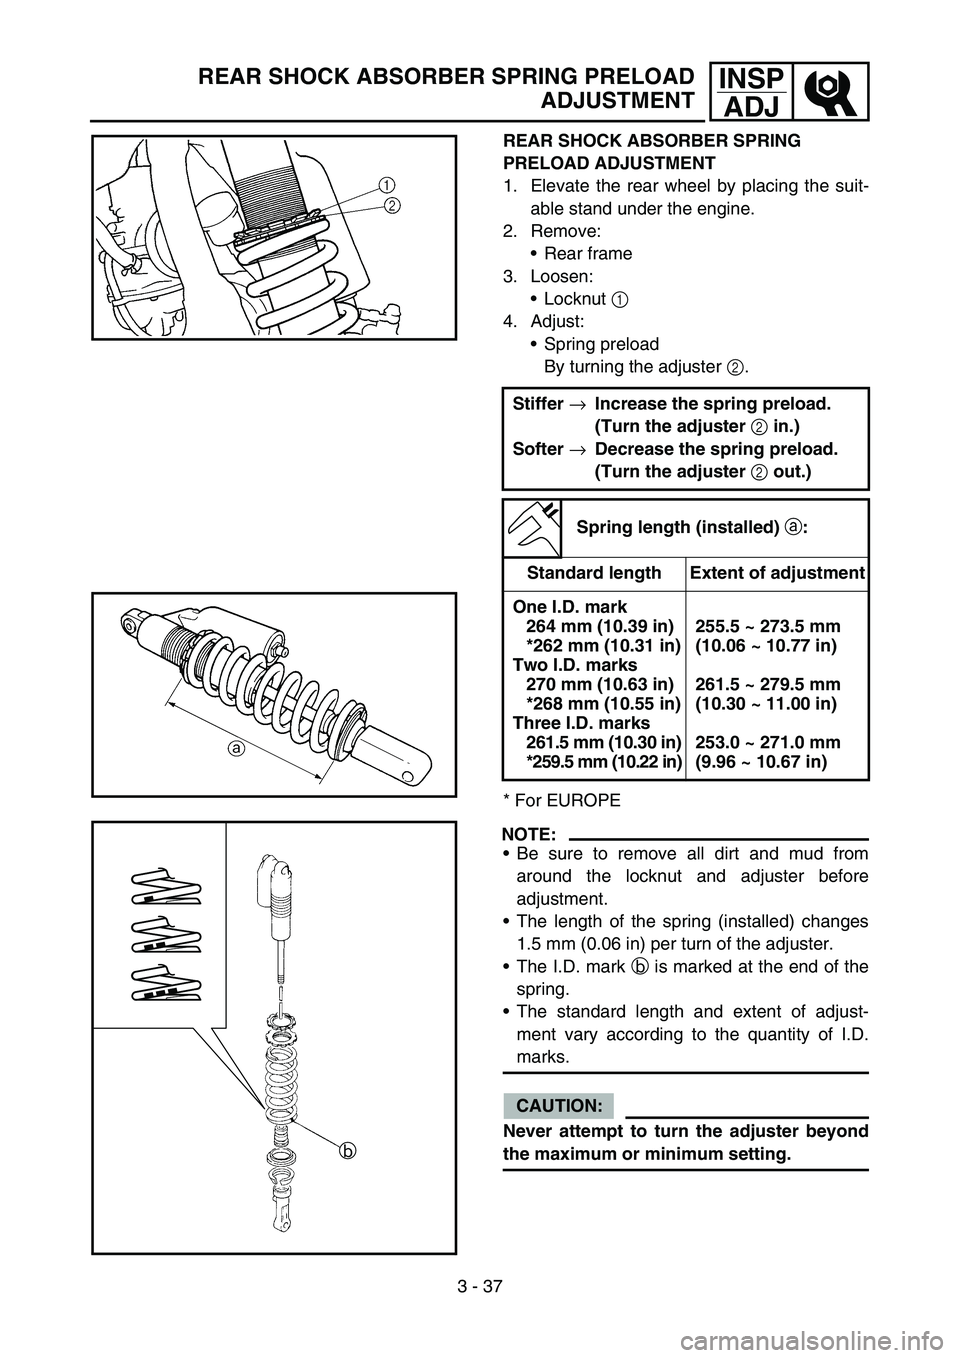 YAMAHA YZ450F 2006  Betriebsanleitungen (in German) 3 - 37
INSP
ADJREAR SHOCK ABSORBER SPRING PRELOAD
ADJUSTMENT
REAR SHOCK ABSORBER SPRING 
PRELOAD ADJUSTMENT
1. Elevate the rear wheel by placing the suit-
able stand under the engine.
2. Remove:
Rear